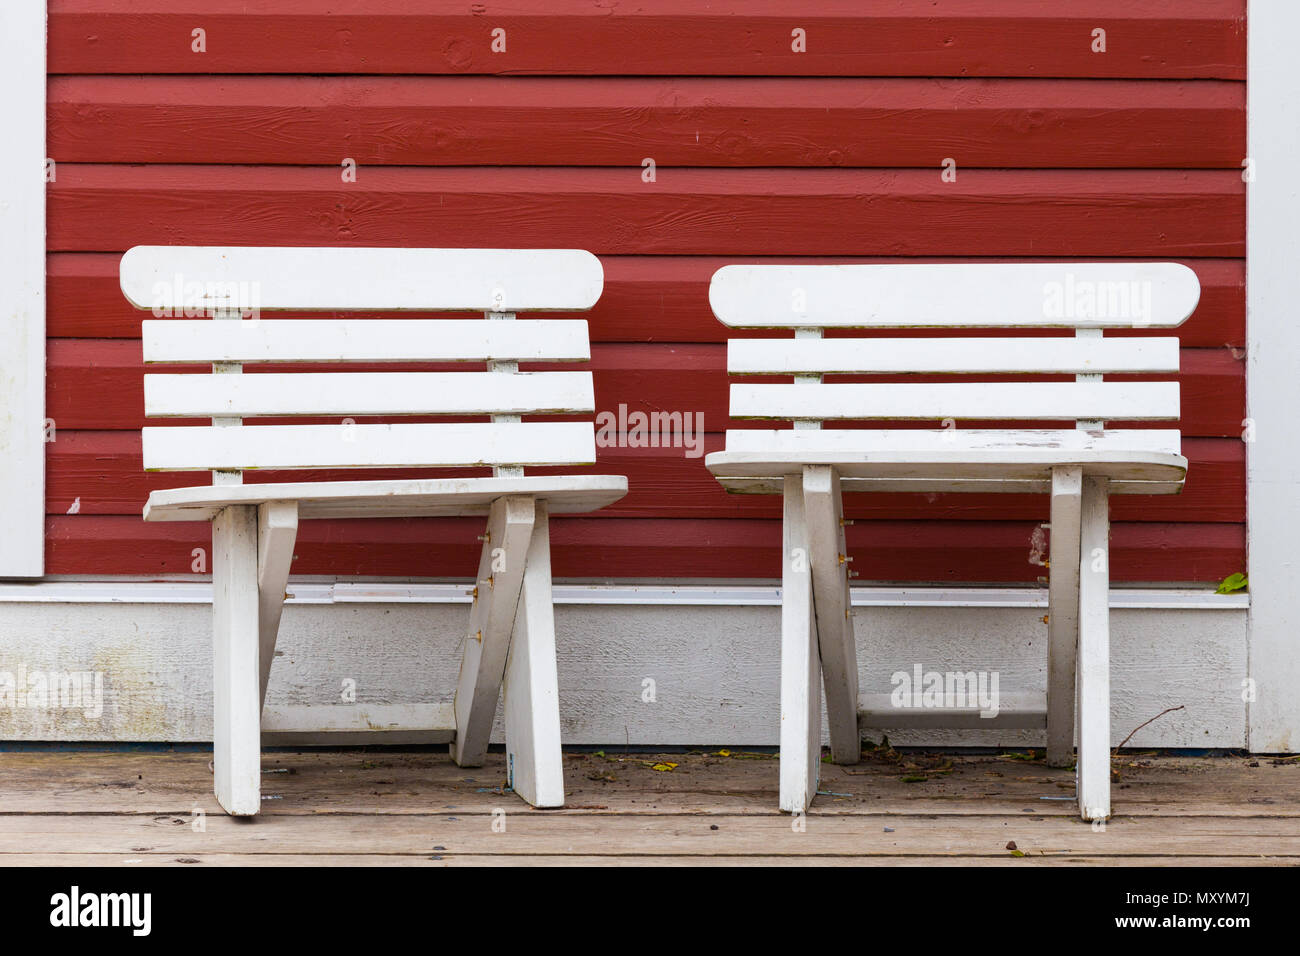 Two small white benches against a red painted wooden wall in Steveston, Canada Stock Photo